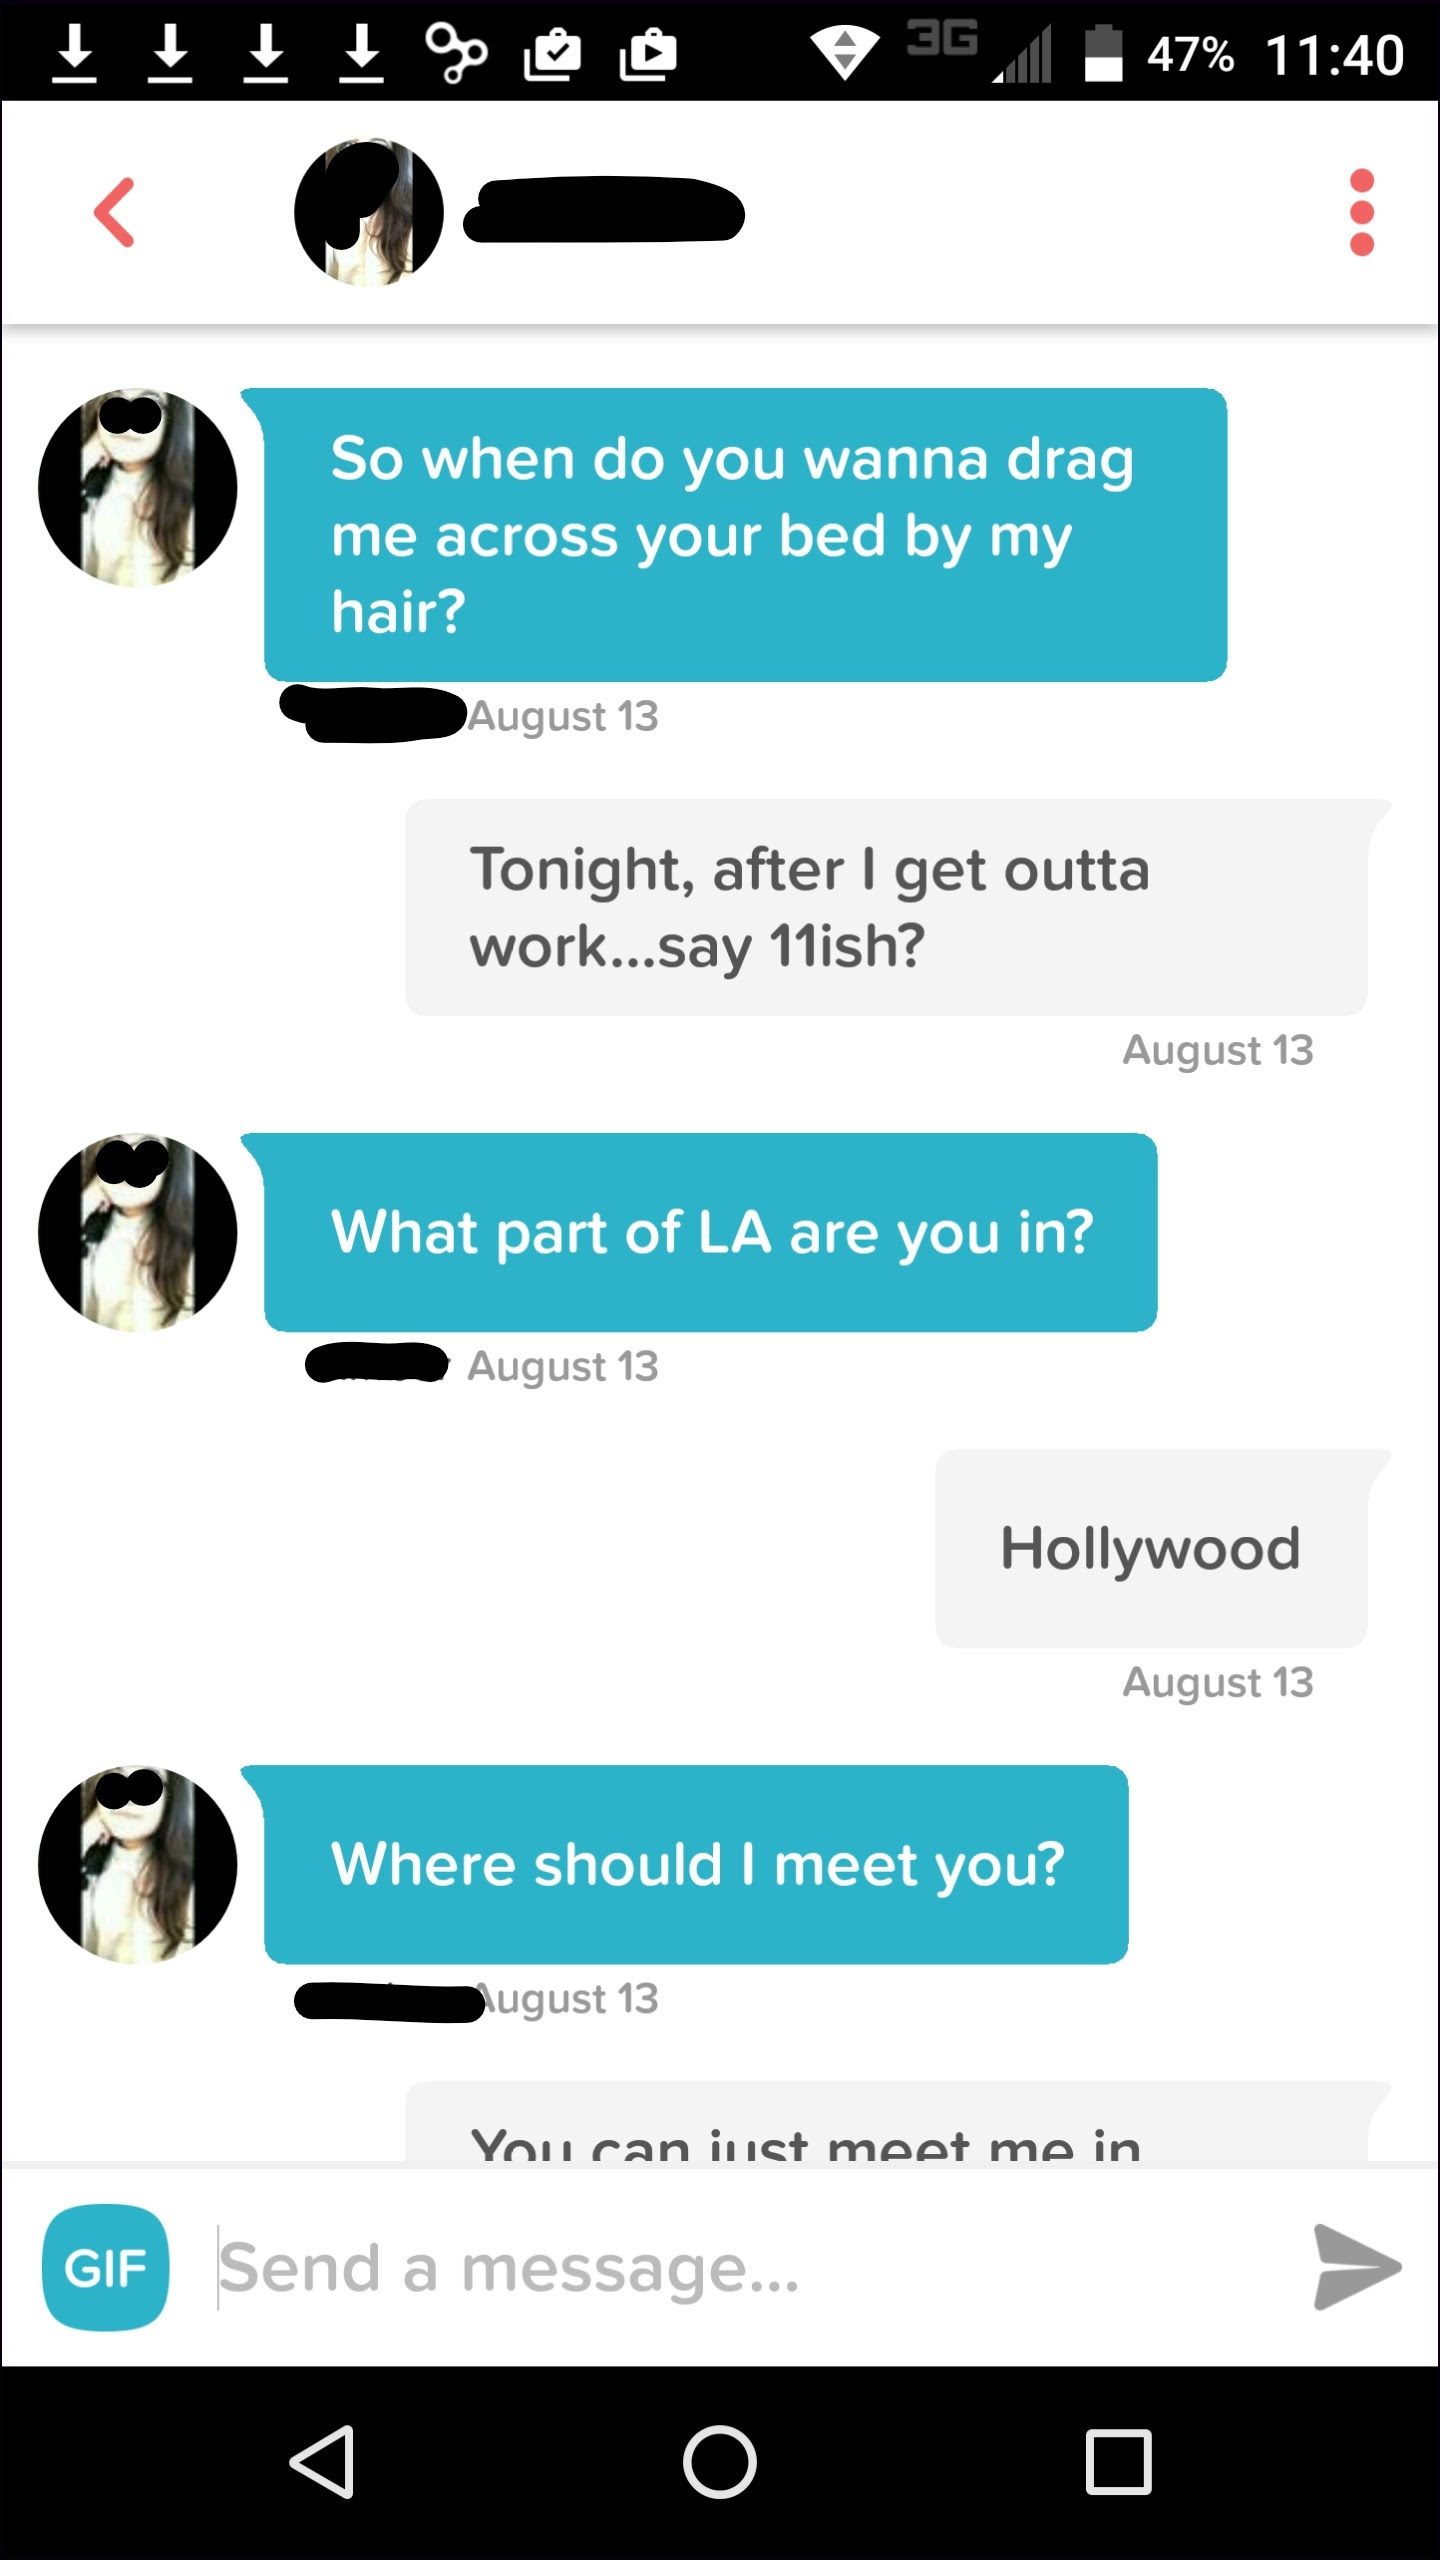 tinder openers to get laid